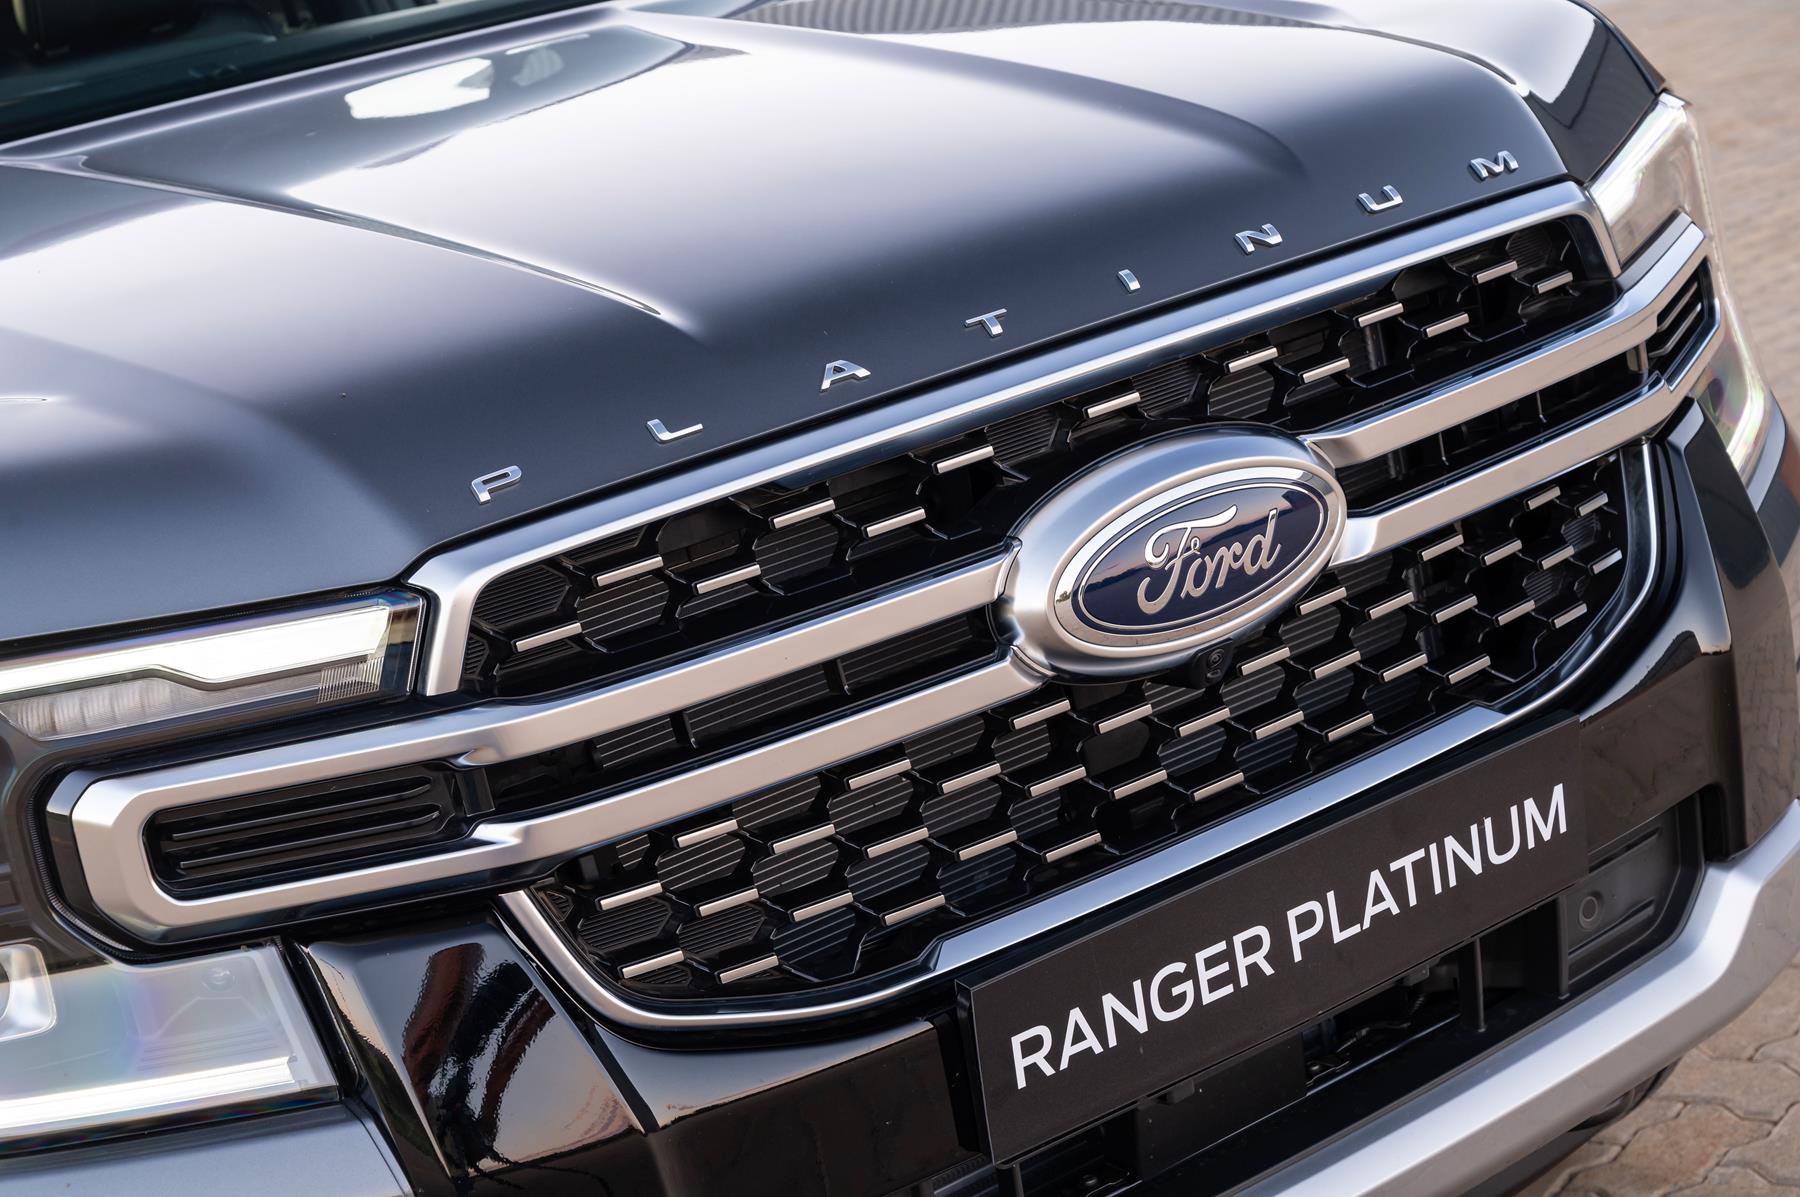 The grill of a grey Ford Ranger Platinum shoing a zoomed in view of the FORD badge and grill